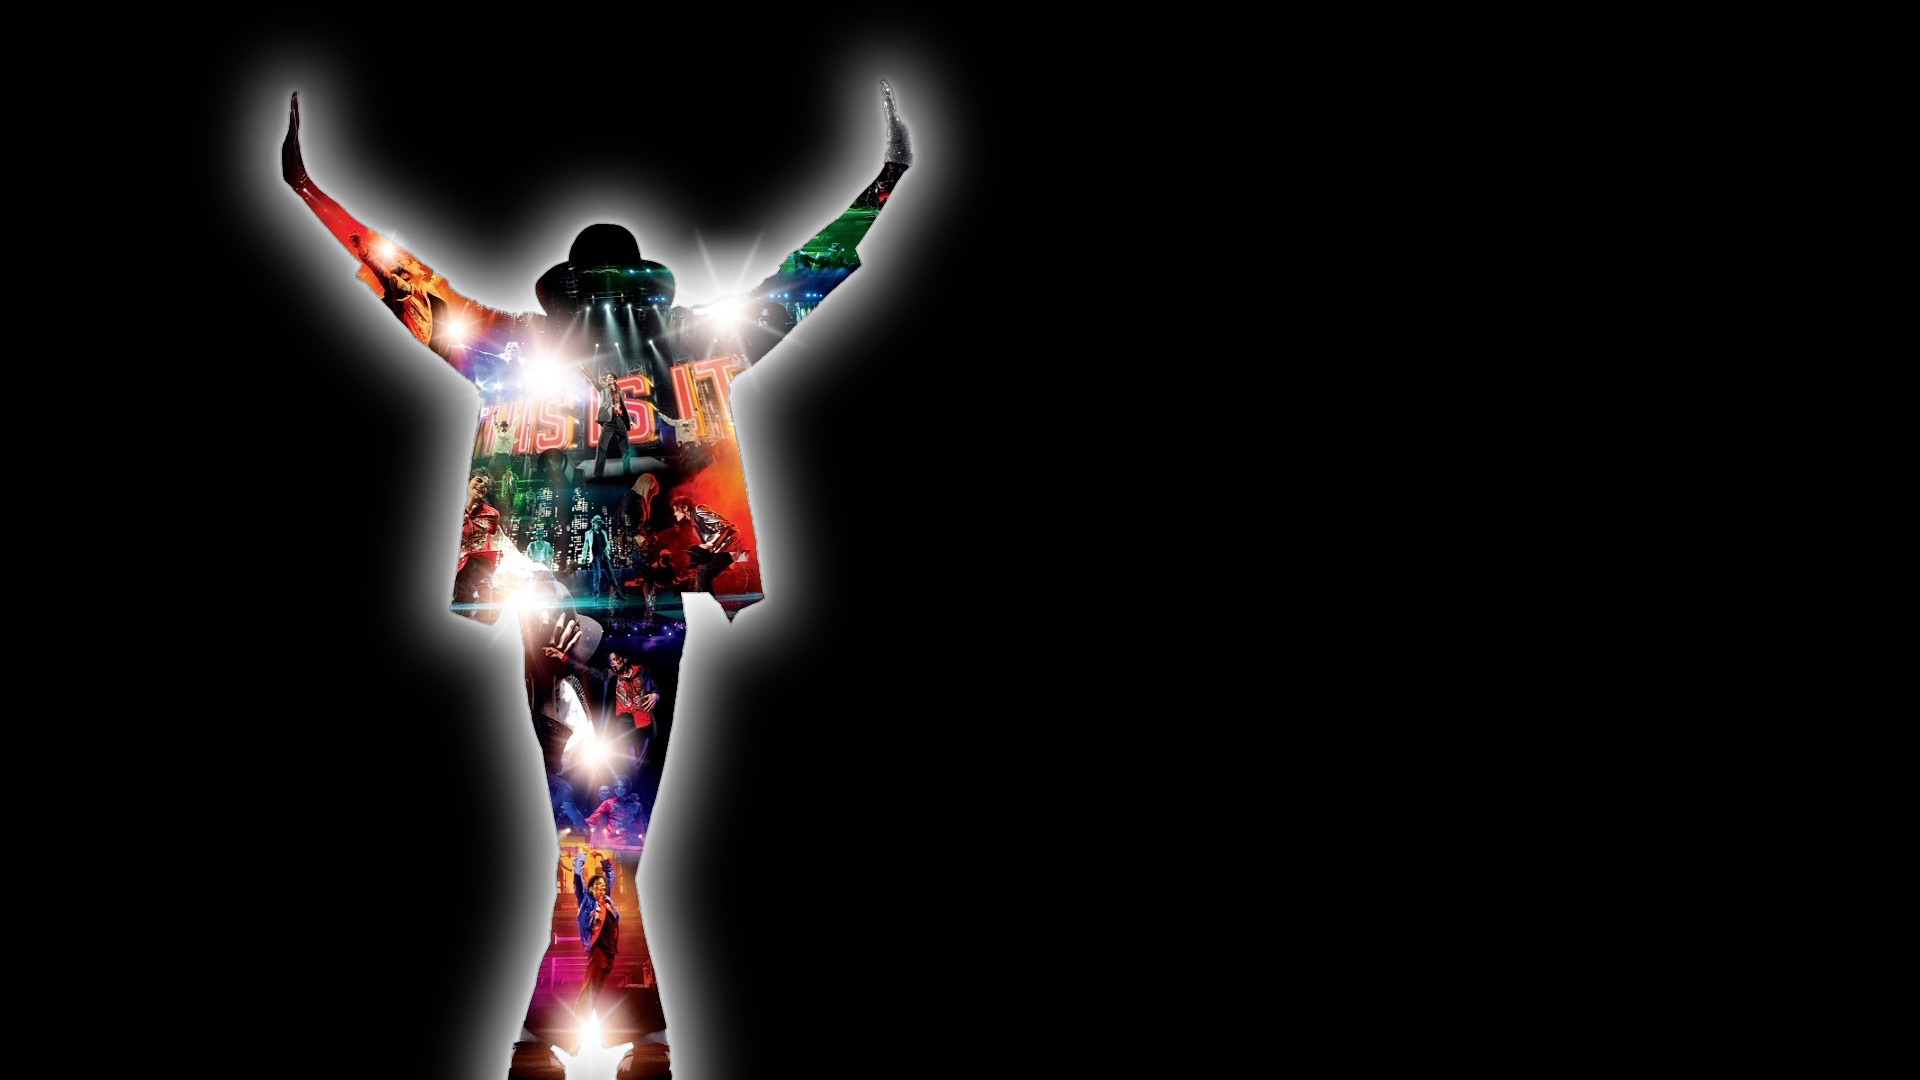 1920x1080 Michael-Jackson-This-Is-It-wallpaper-wp6009690